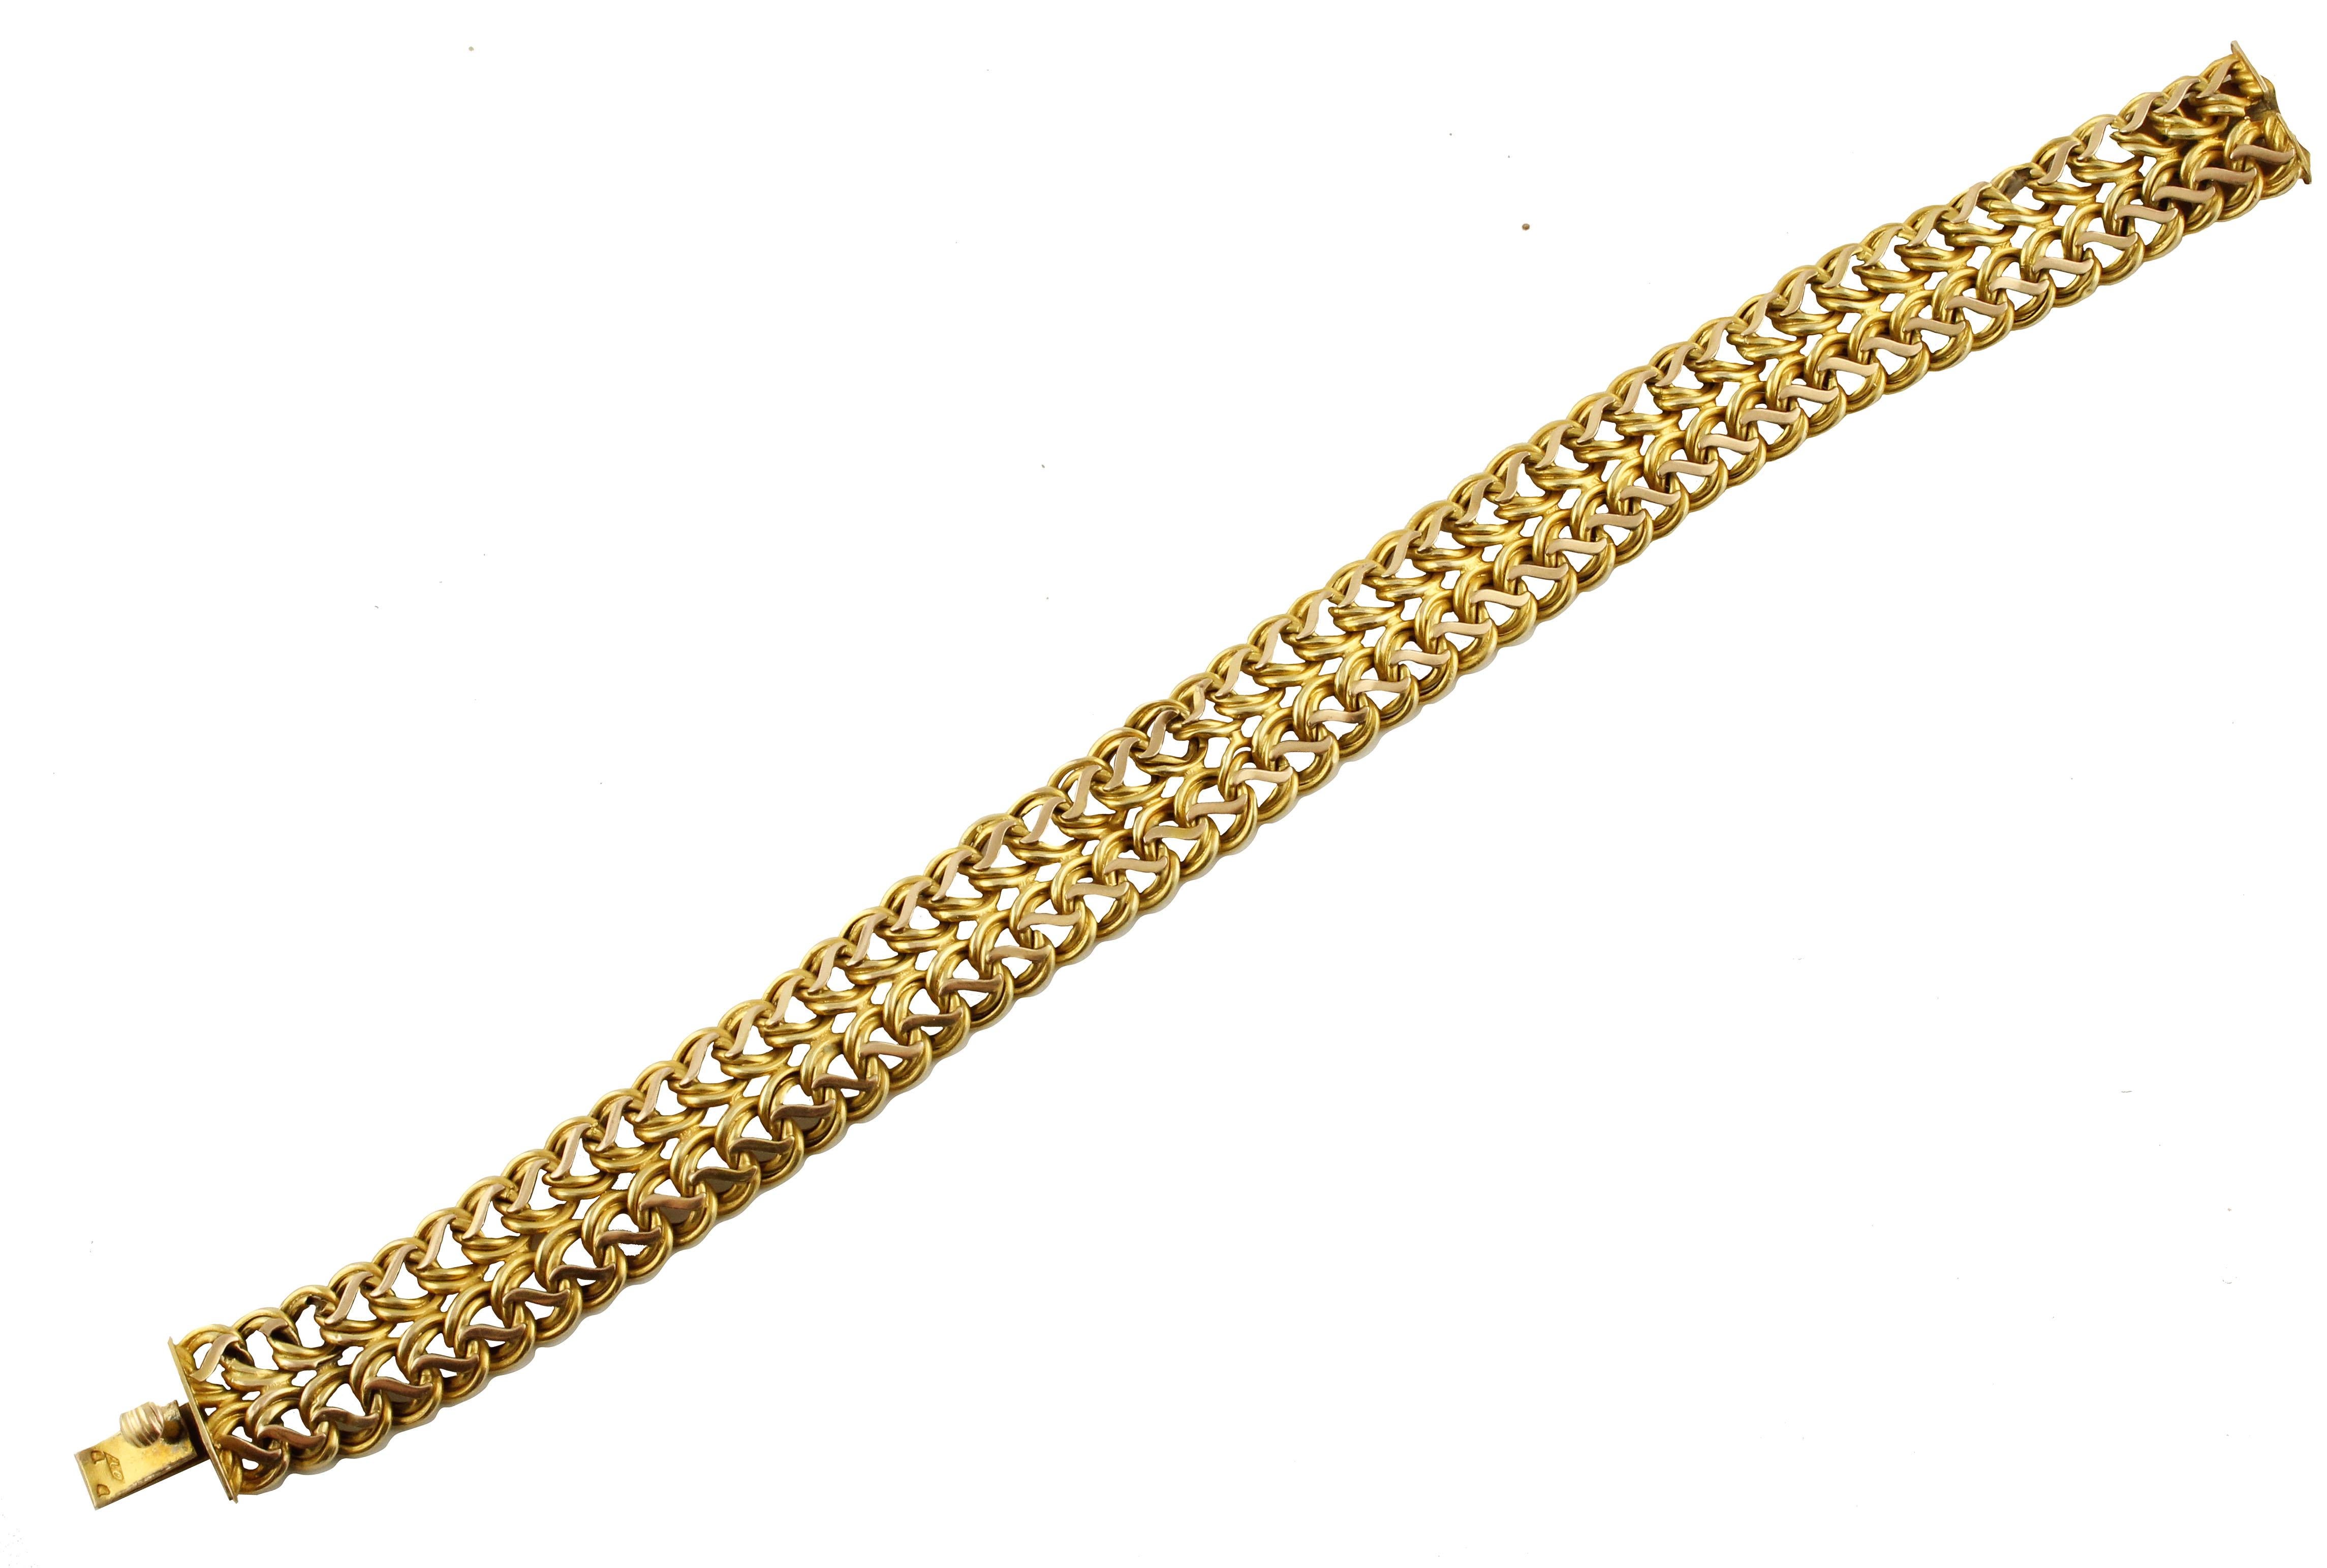 Elegan and light 9K yellow gold retrò bracelet composed of amazing interweaving structure
Total Weight 11.80 g
R.F *chc
Length 20 cm 
Width 1.4 cm 

For any enquires, please contact the seller through the message center.


